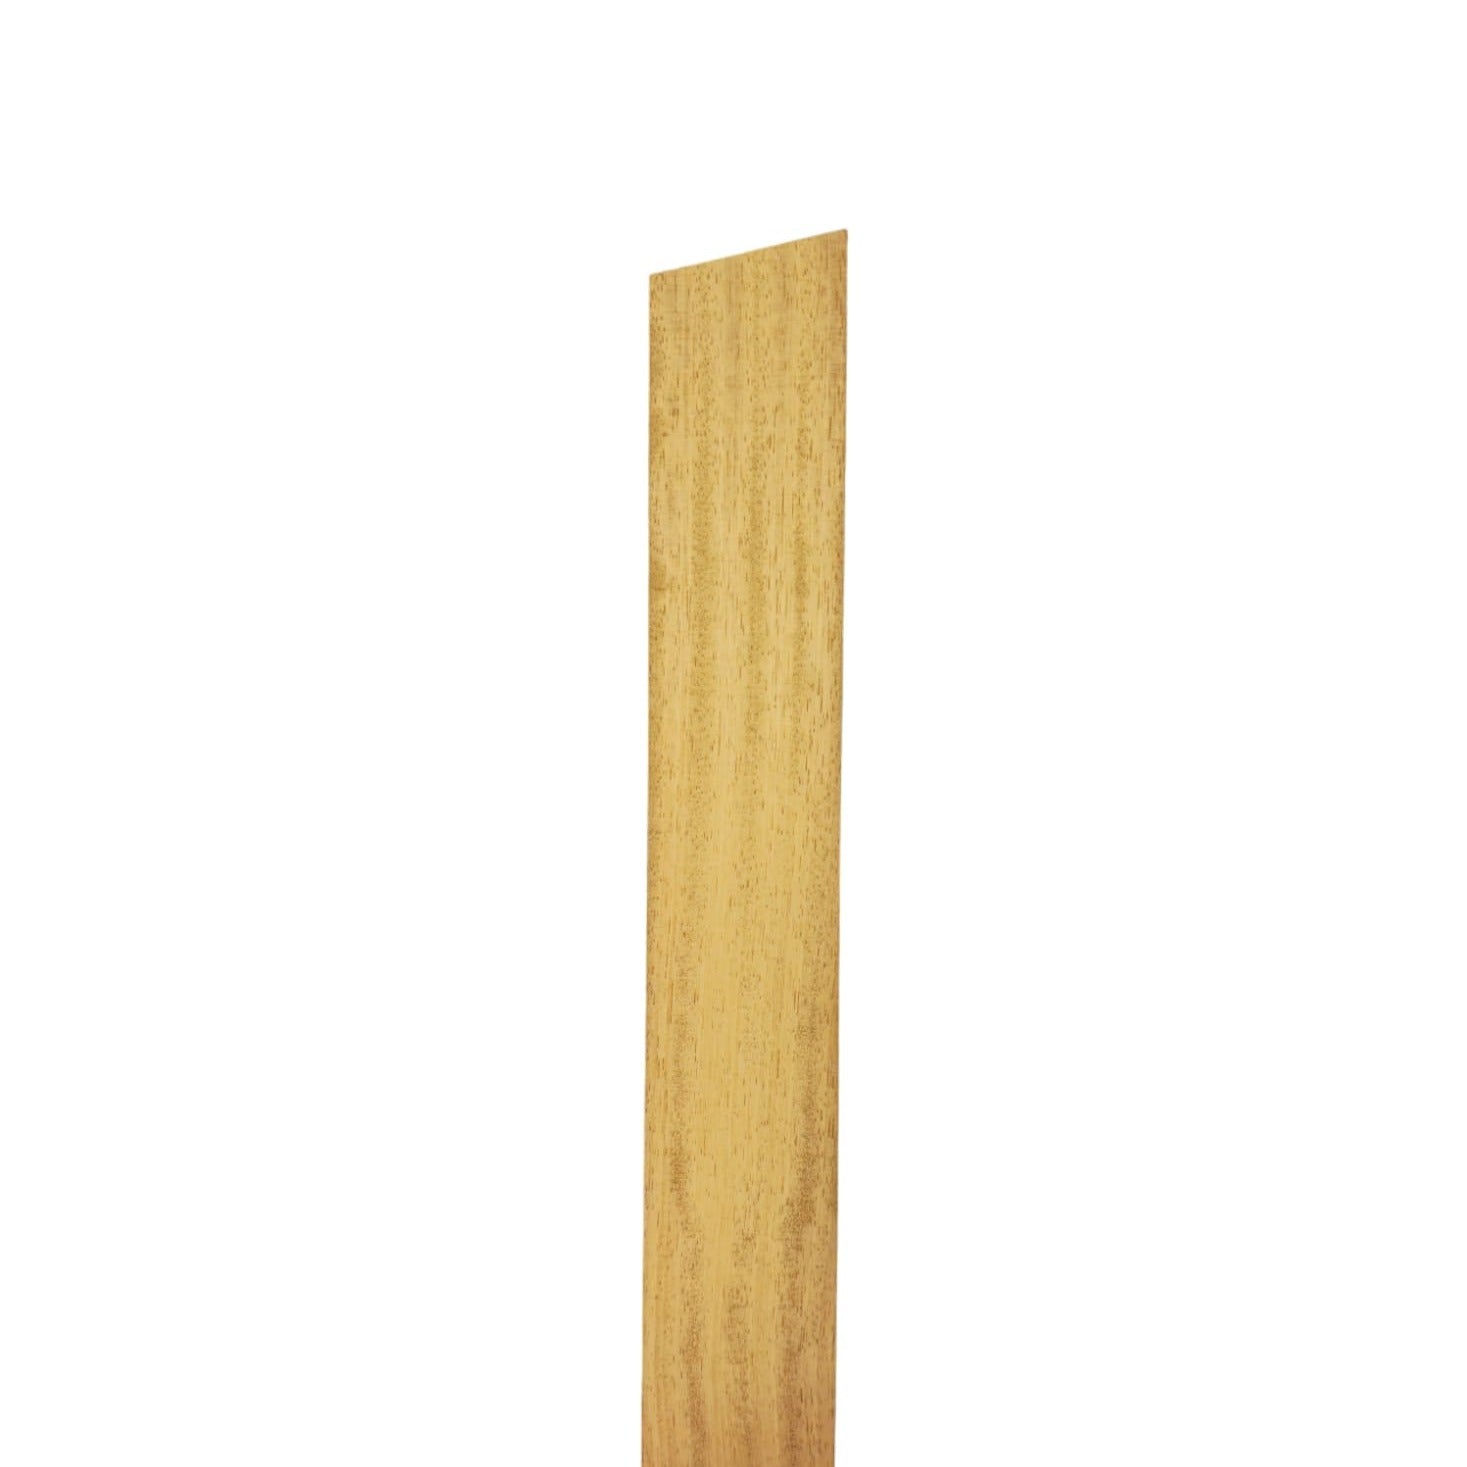 A light coloured wall post made of Iroko wood, measuring 95mm x 70mm